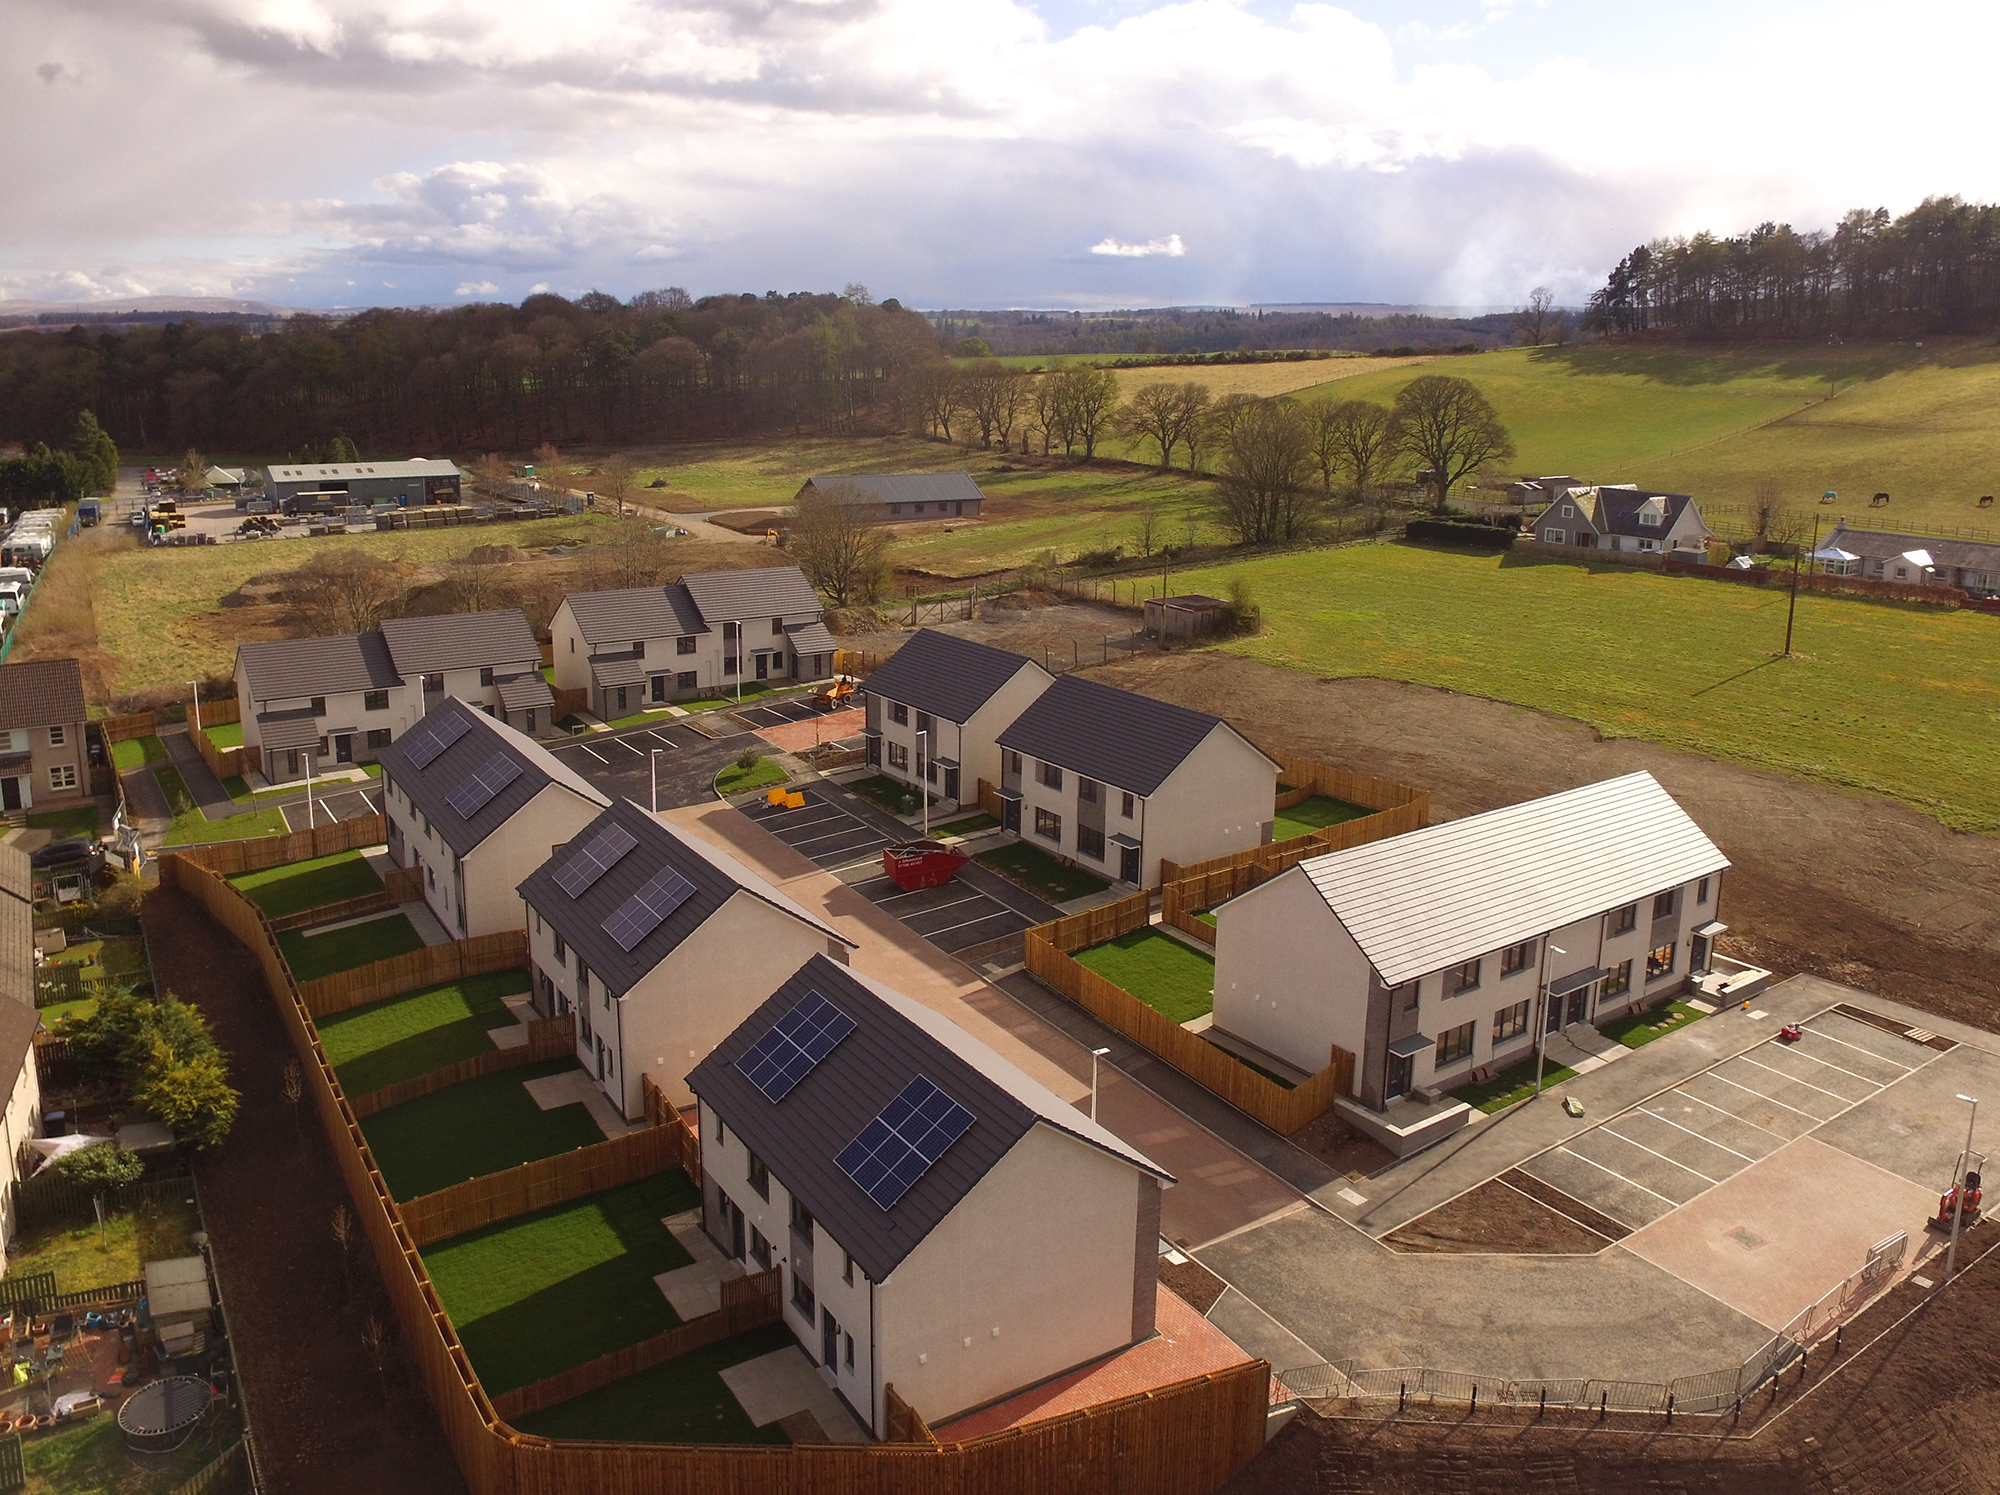 Hillcrest named as one of the UK's biggest affordable housing builders in 2020/21